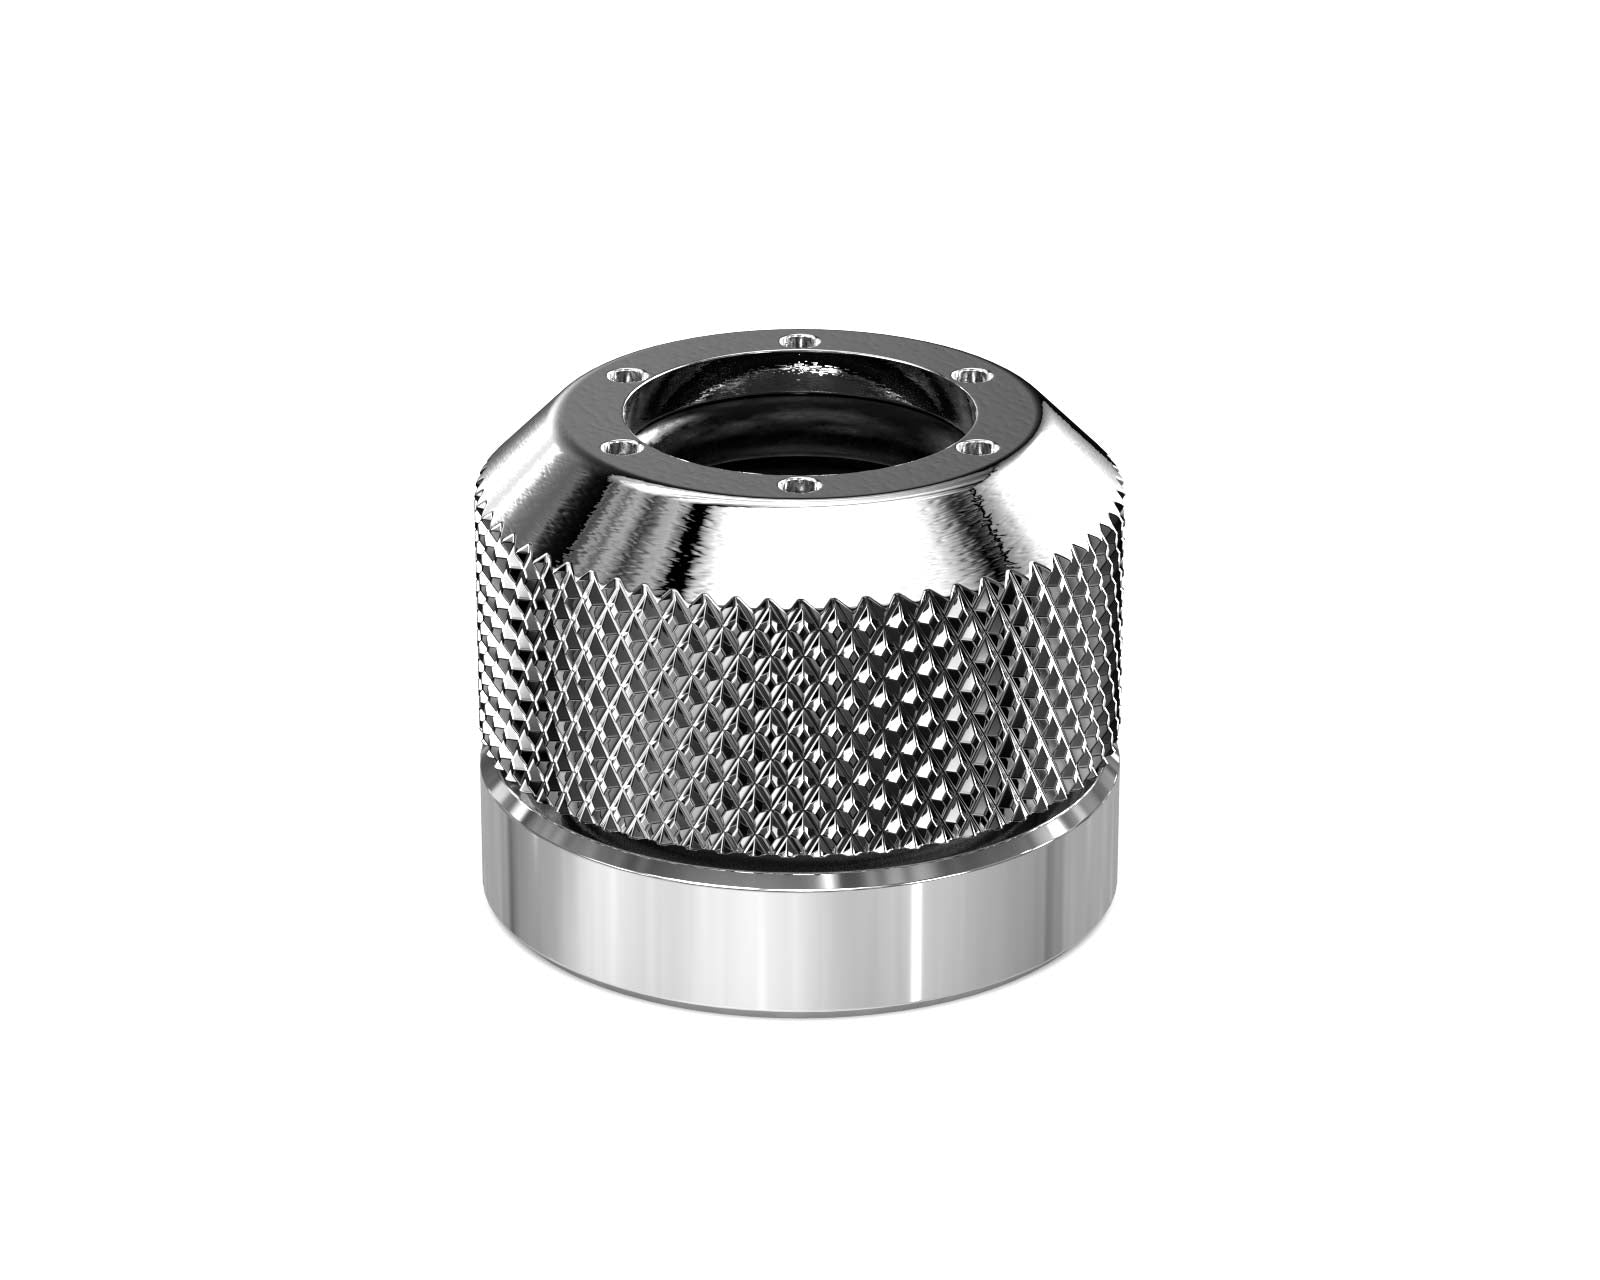 PrimoChill 1/2in. Rigid RevolverSX Series Coupler G 1/4 Fitting - PrimoChill - KEEPING IT COOL Silver Nickel